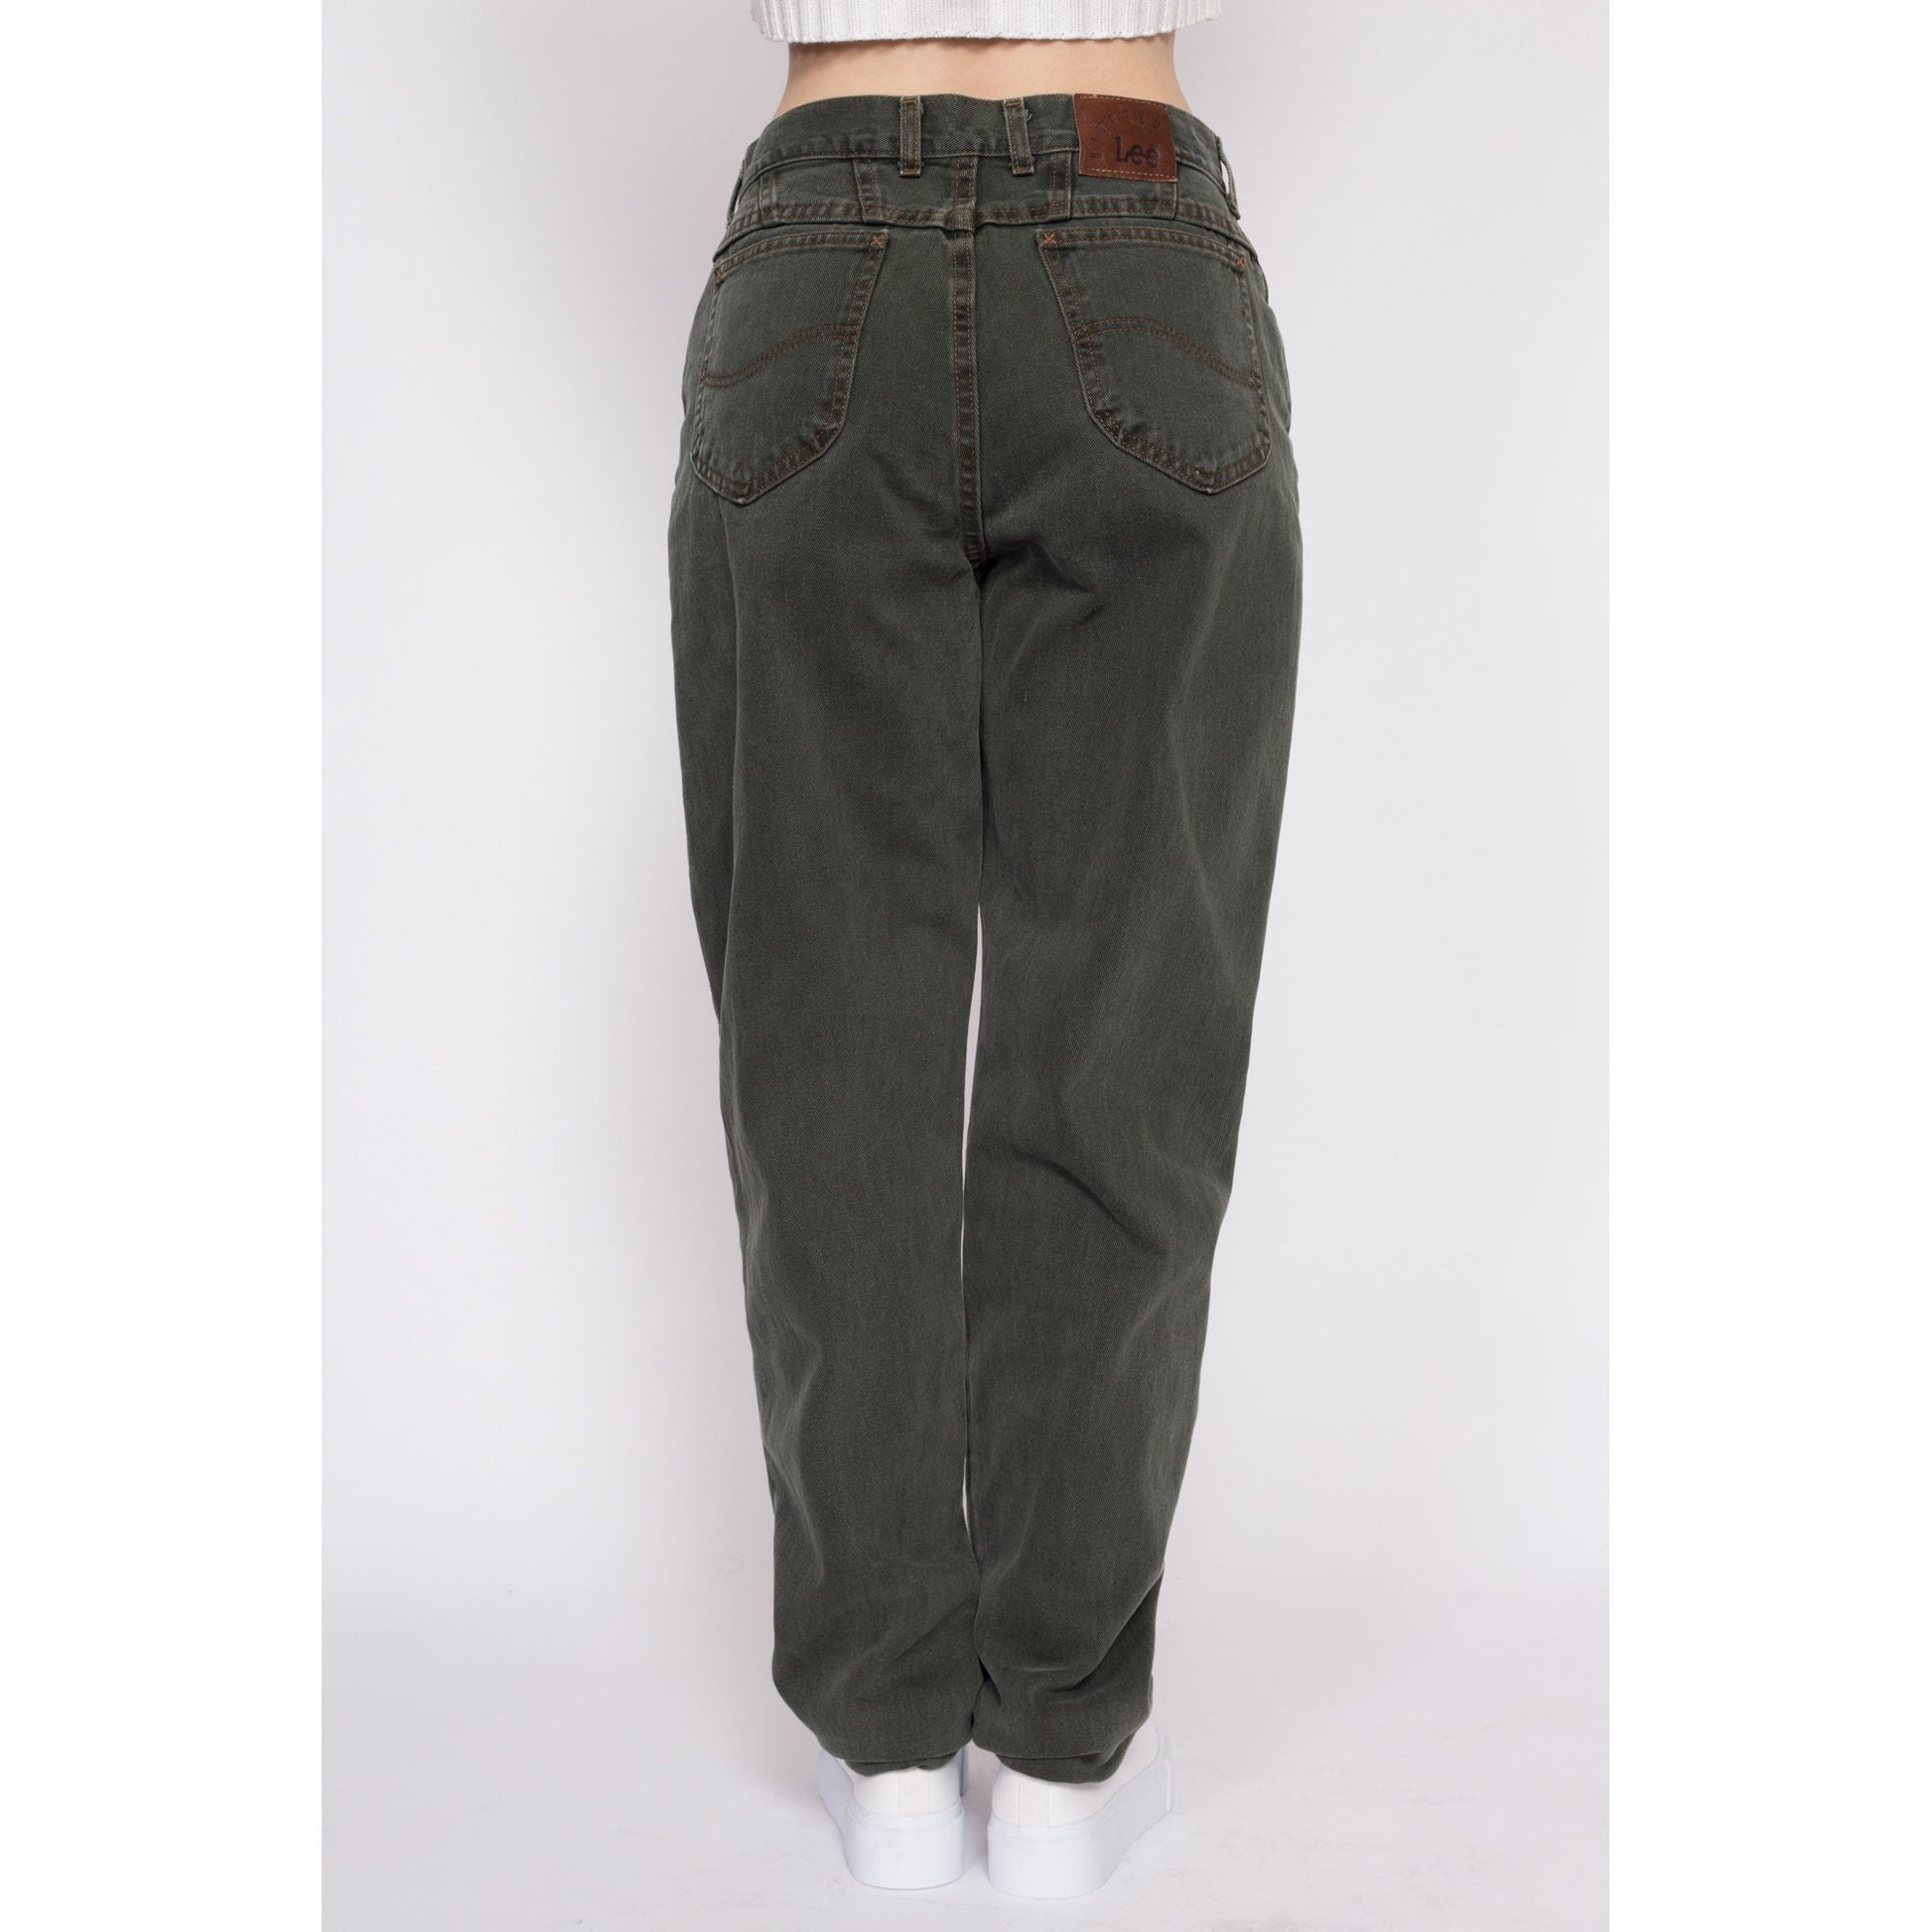 90s Lee Olive High Waisted Jeans - Medium to Large Tall, 30.5" | Vintage Denim Tapered Leg Mom Jeans